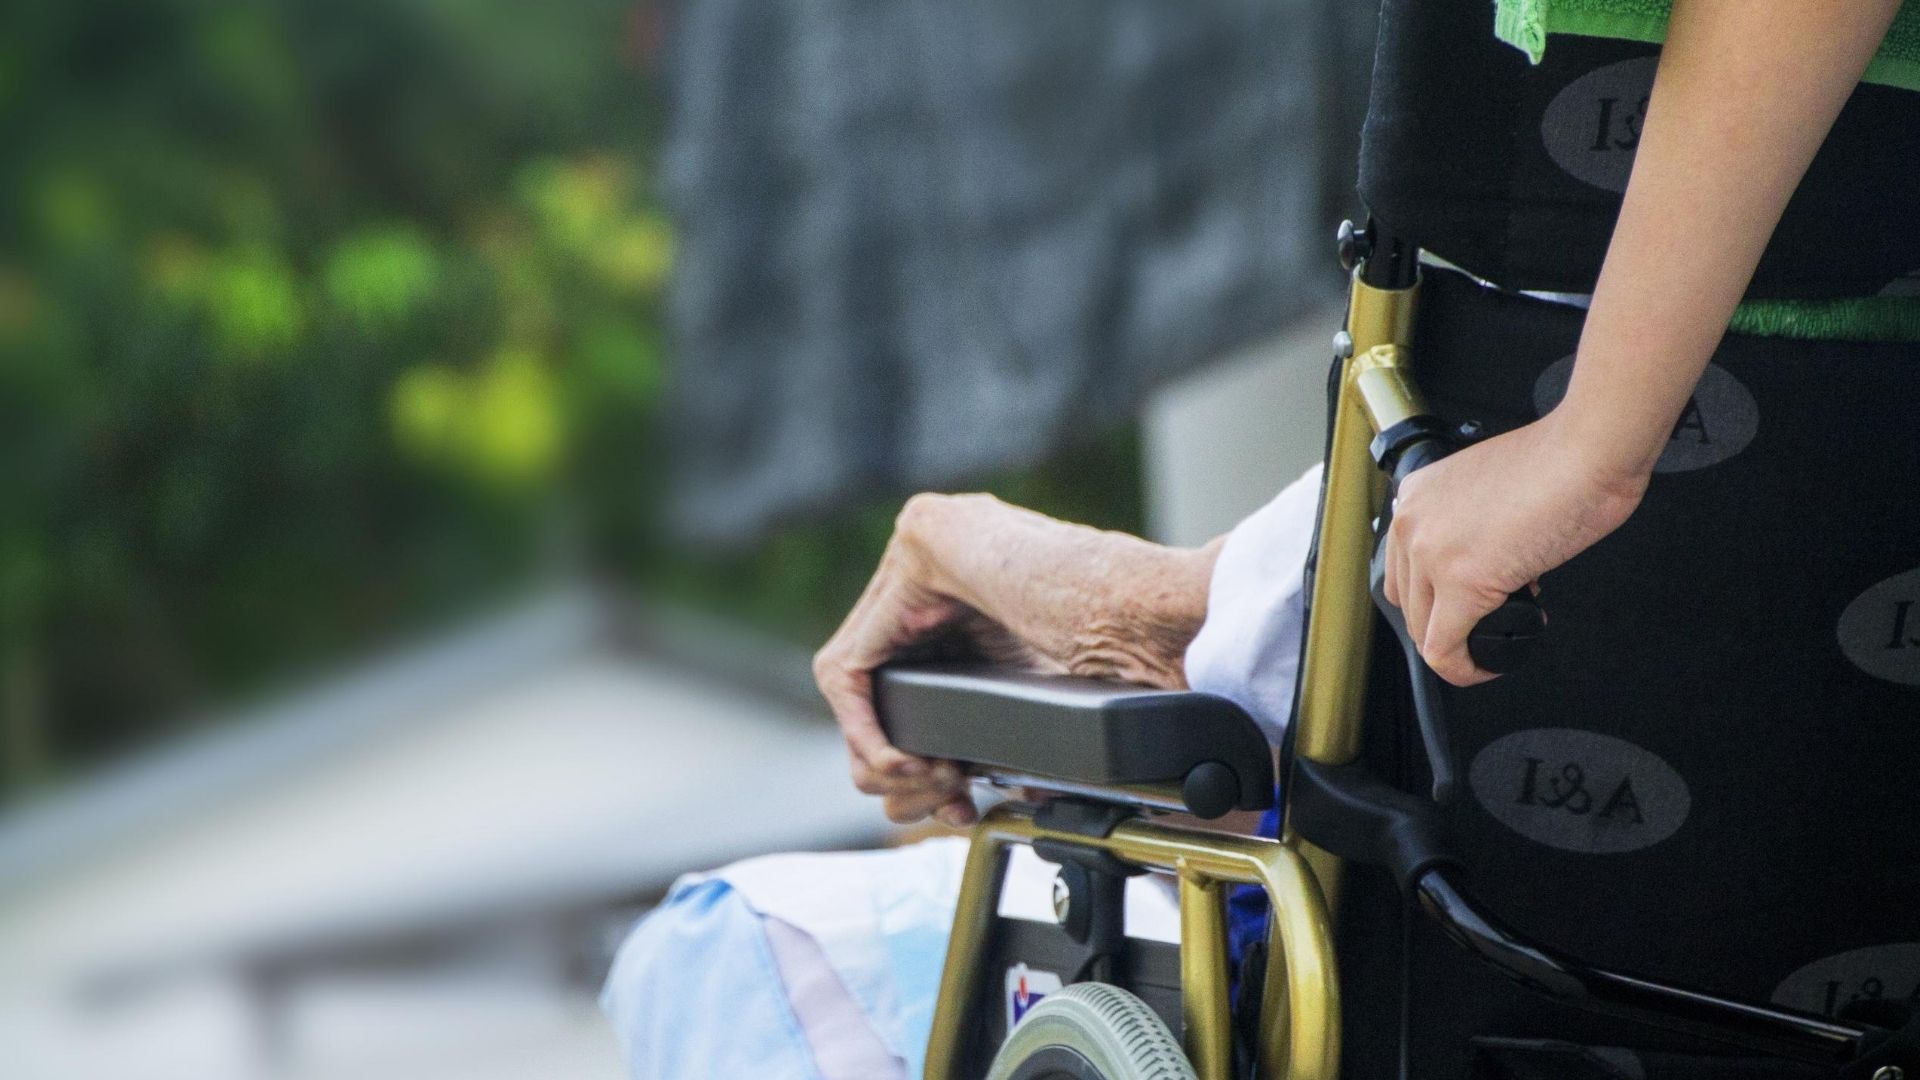 Arm of elderly woman resting on arm rest of wheelchair